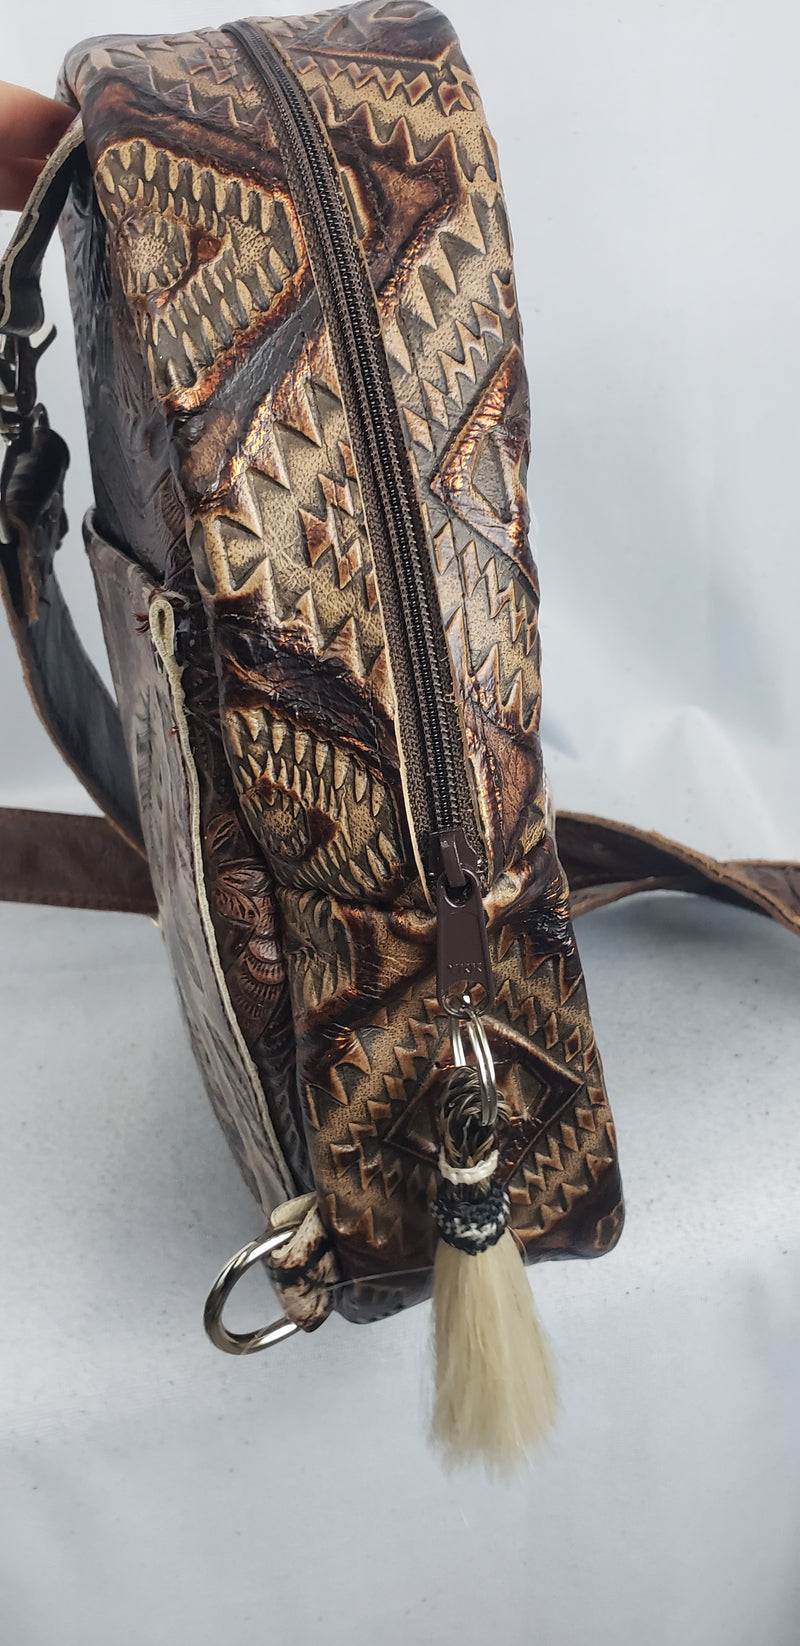 Speckled Cowhide Aztec Feather Sling Bag